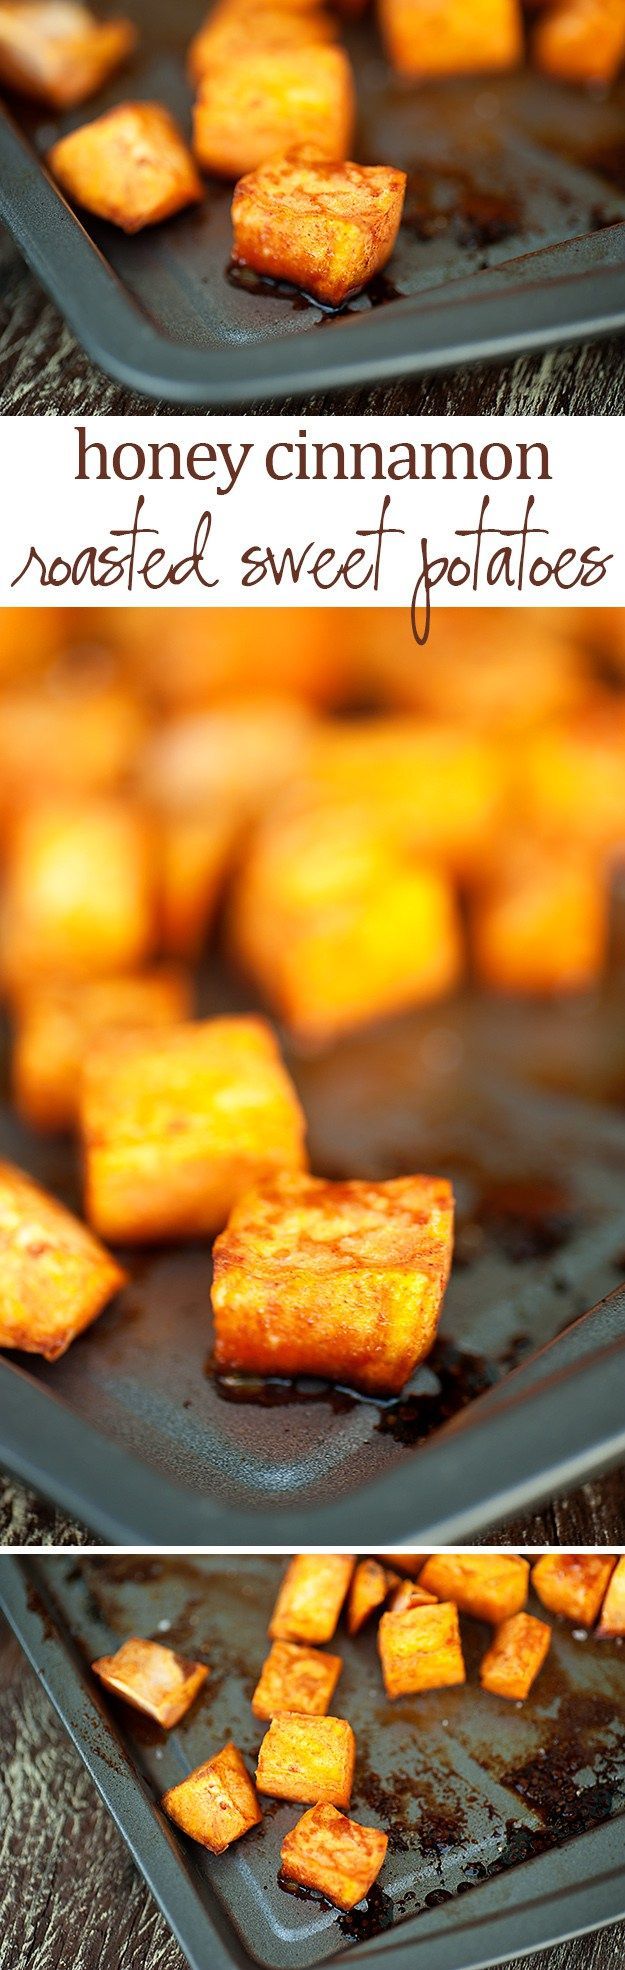 Honey Cinnamon Roasted Sweet Potatoes – perfect for #Thanksgiving!